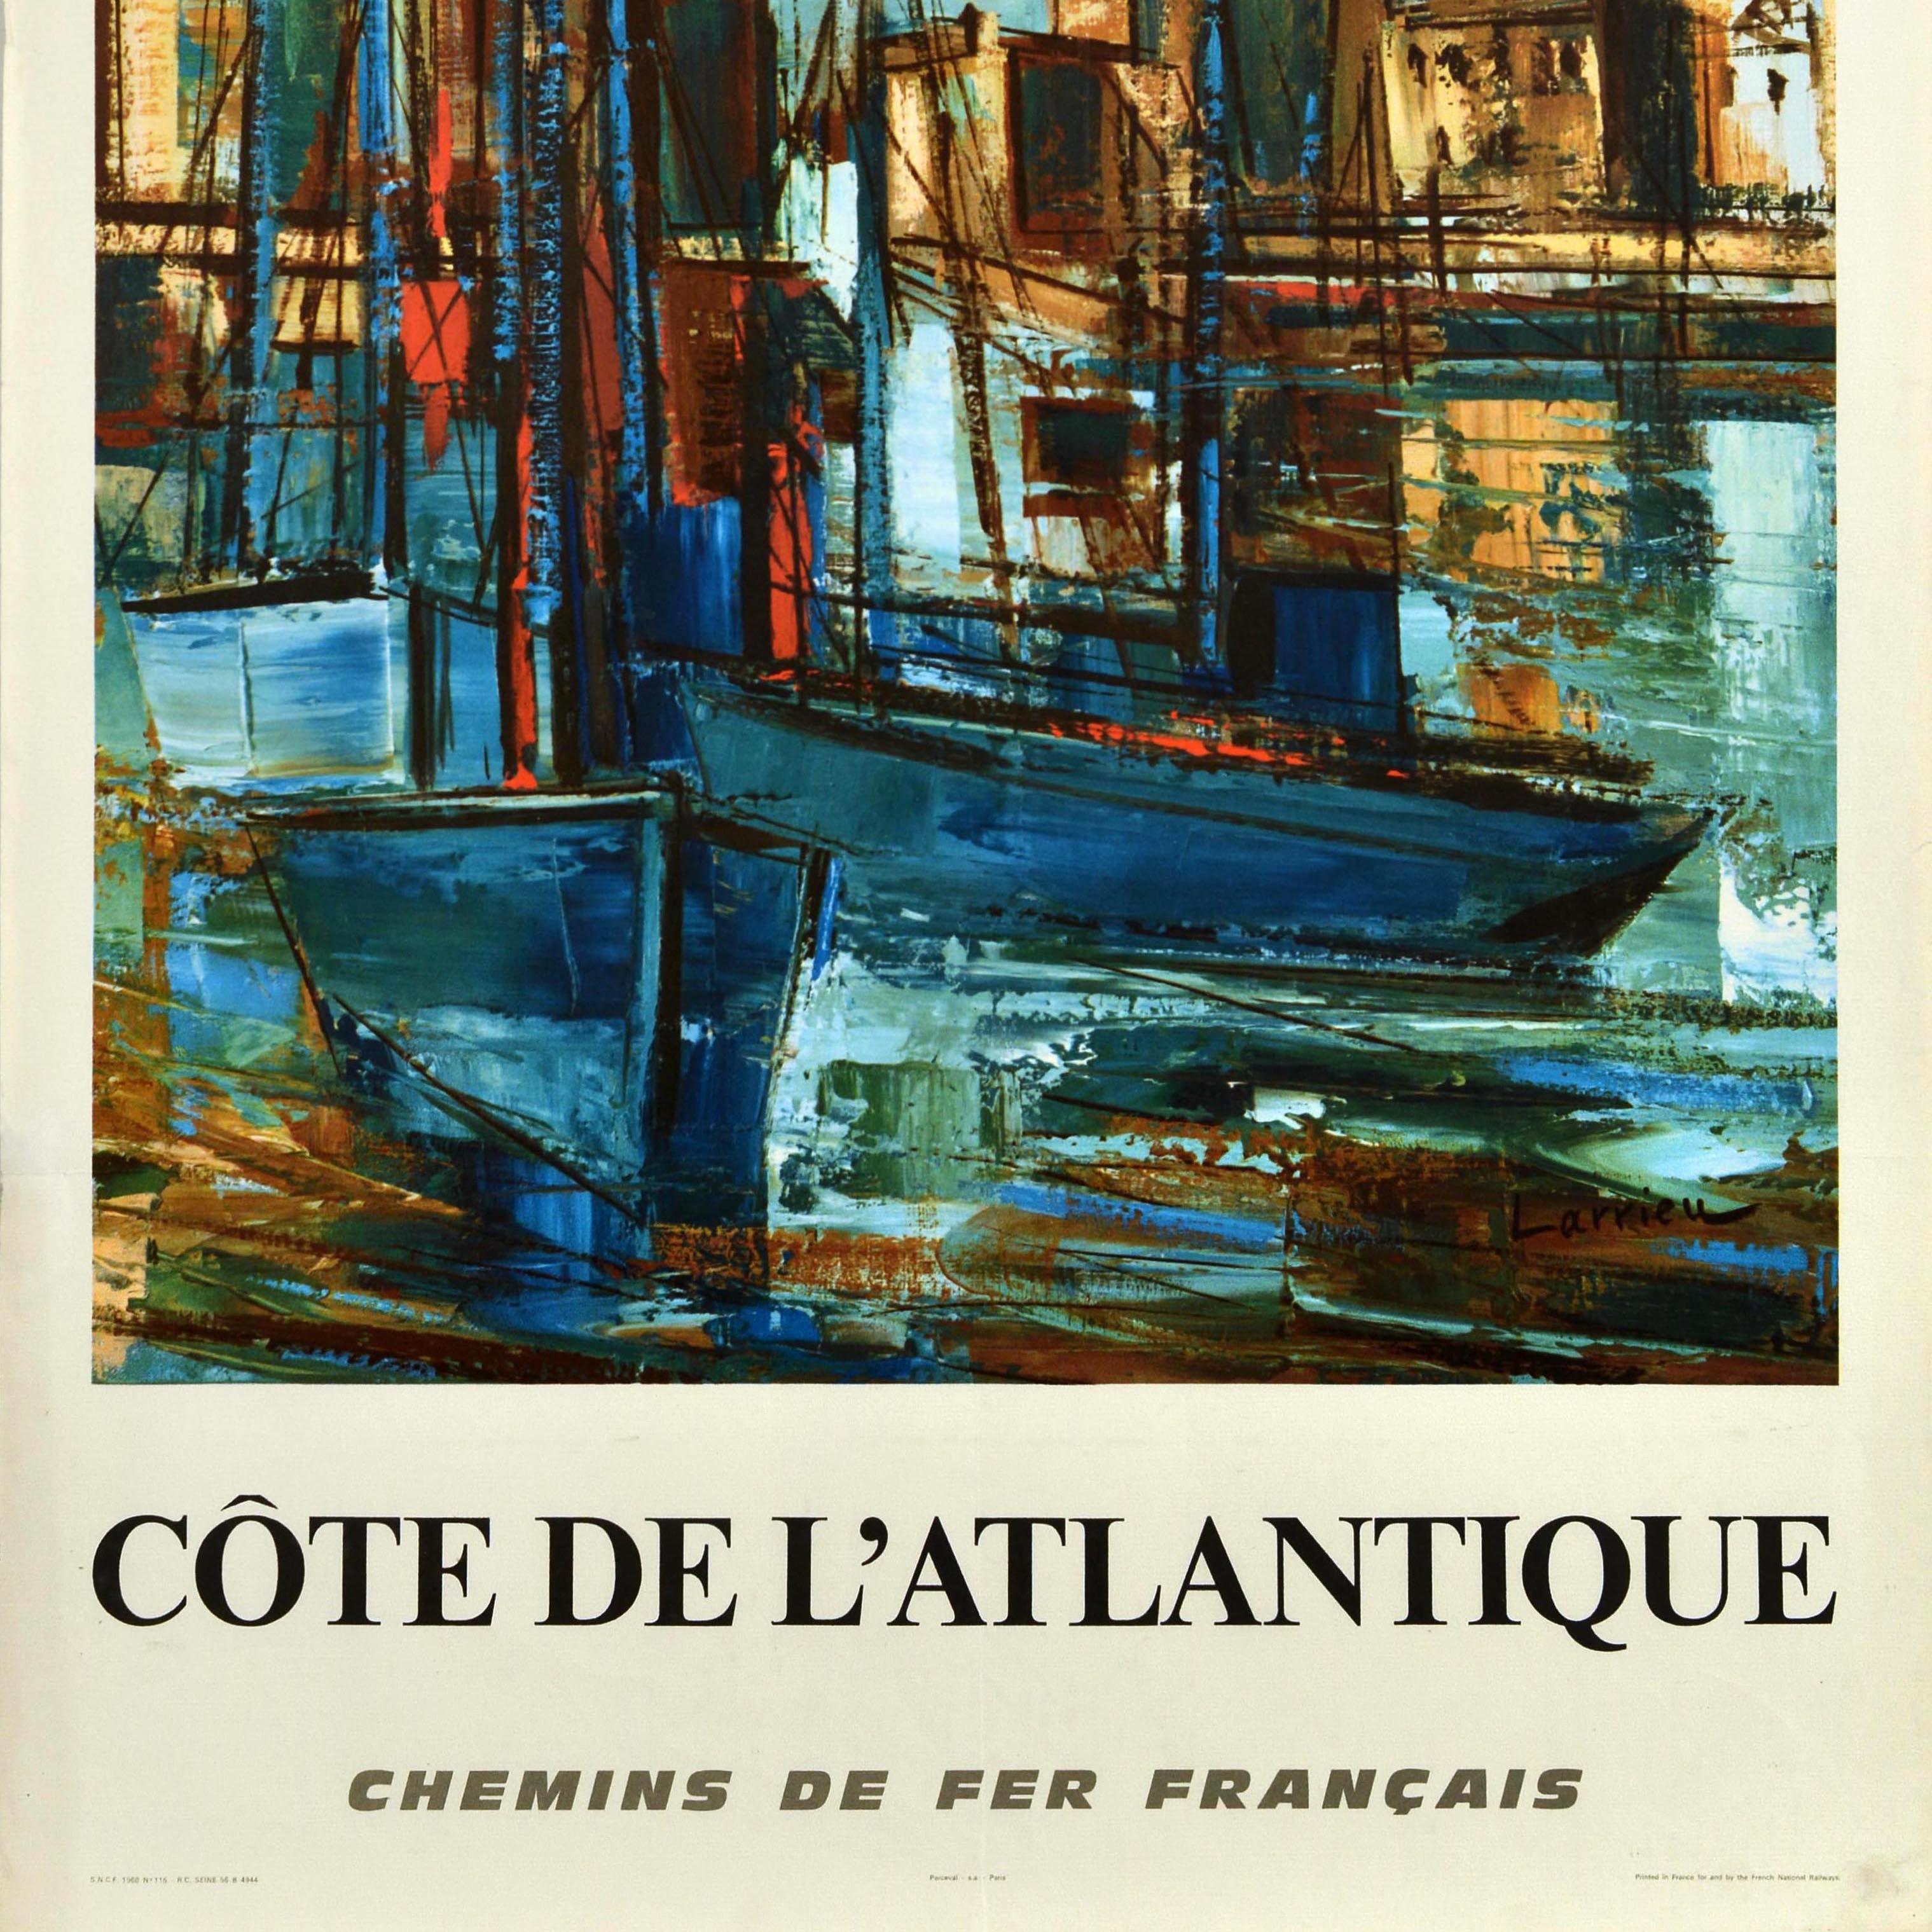 Original vintage travel poster advertising France The Atlantic Coast French Railways - Cote De L'Atlantique - featuring artwork by Gaston Larrieu (1908-1983) depicting a harbour scene with blue wooden sailing boats on the water and buildings in the